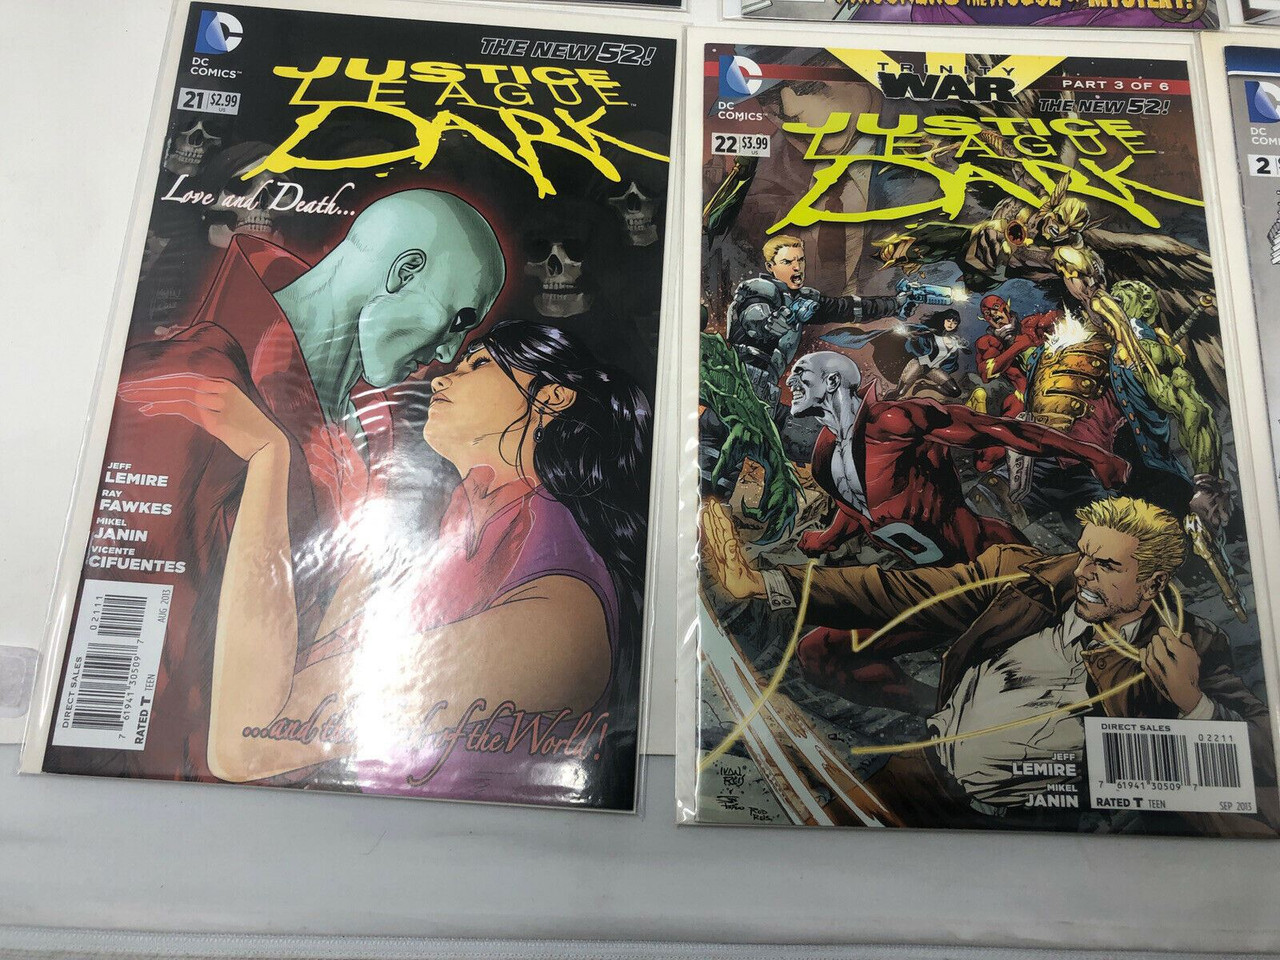 DC JUSTICE LEAGUE DARK  #1, 14, 20-22 + ANNUAL 2 COMIC 2013 NEW 52 - PREOWNED